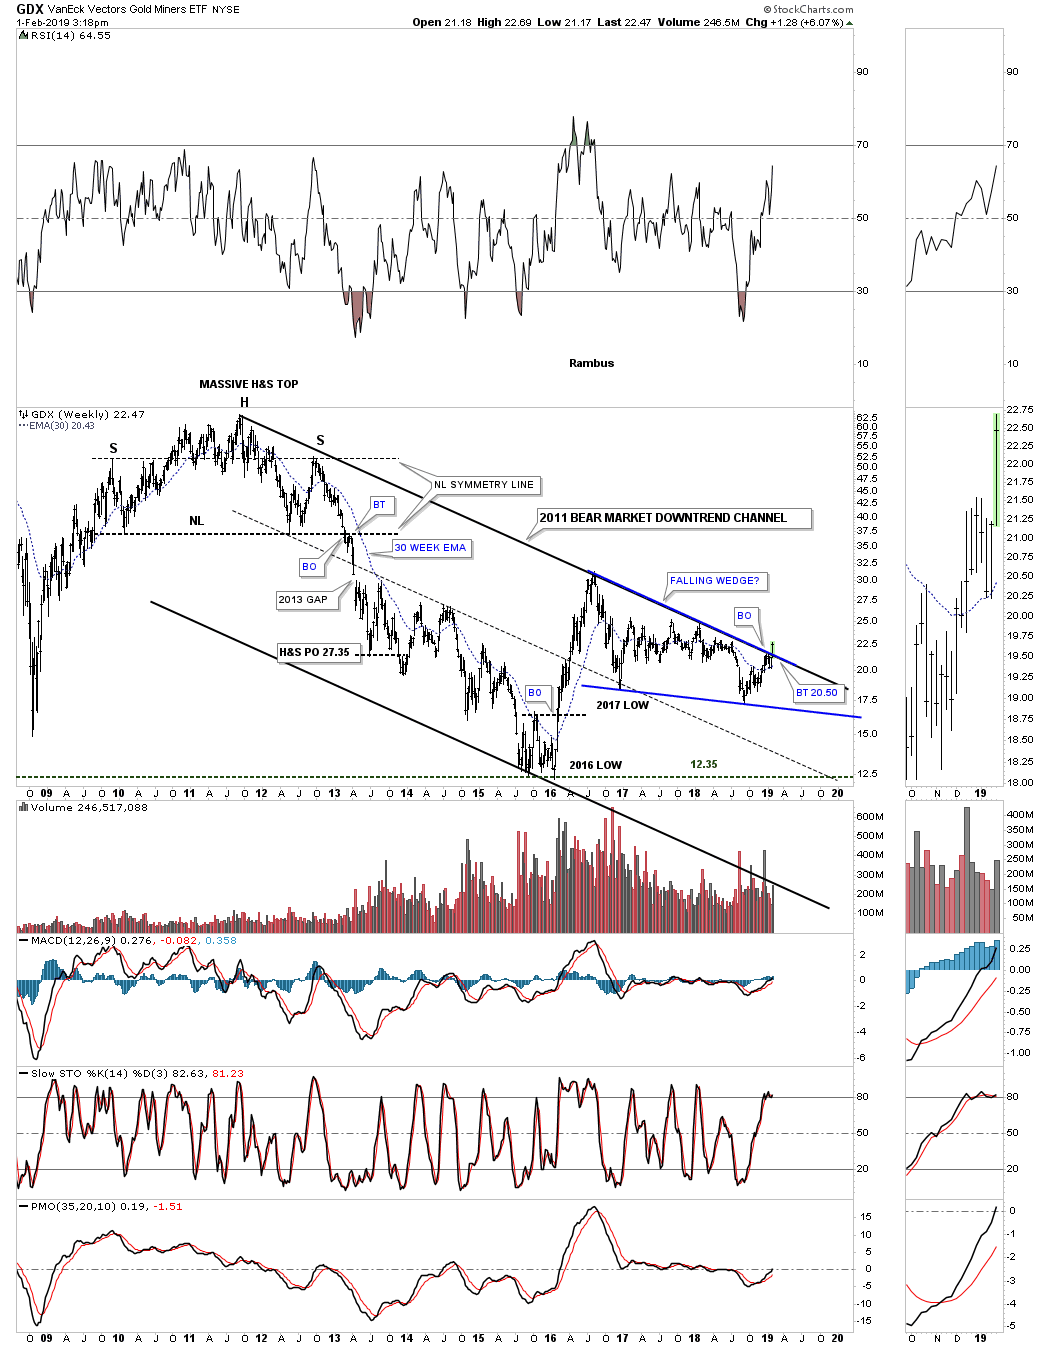 GDX Weekly Breakout and Backtest